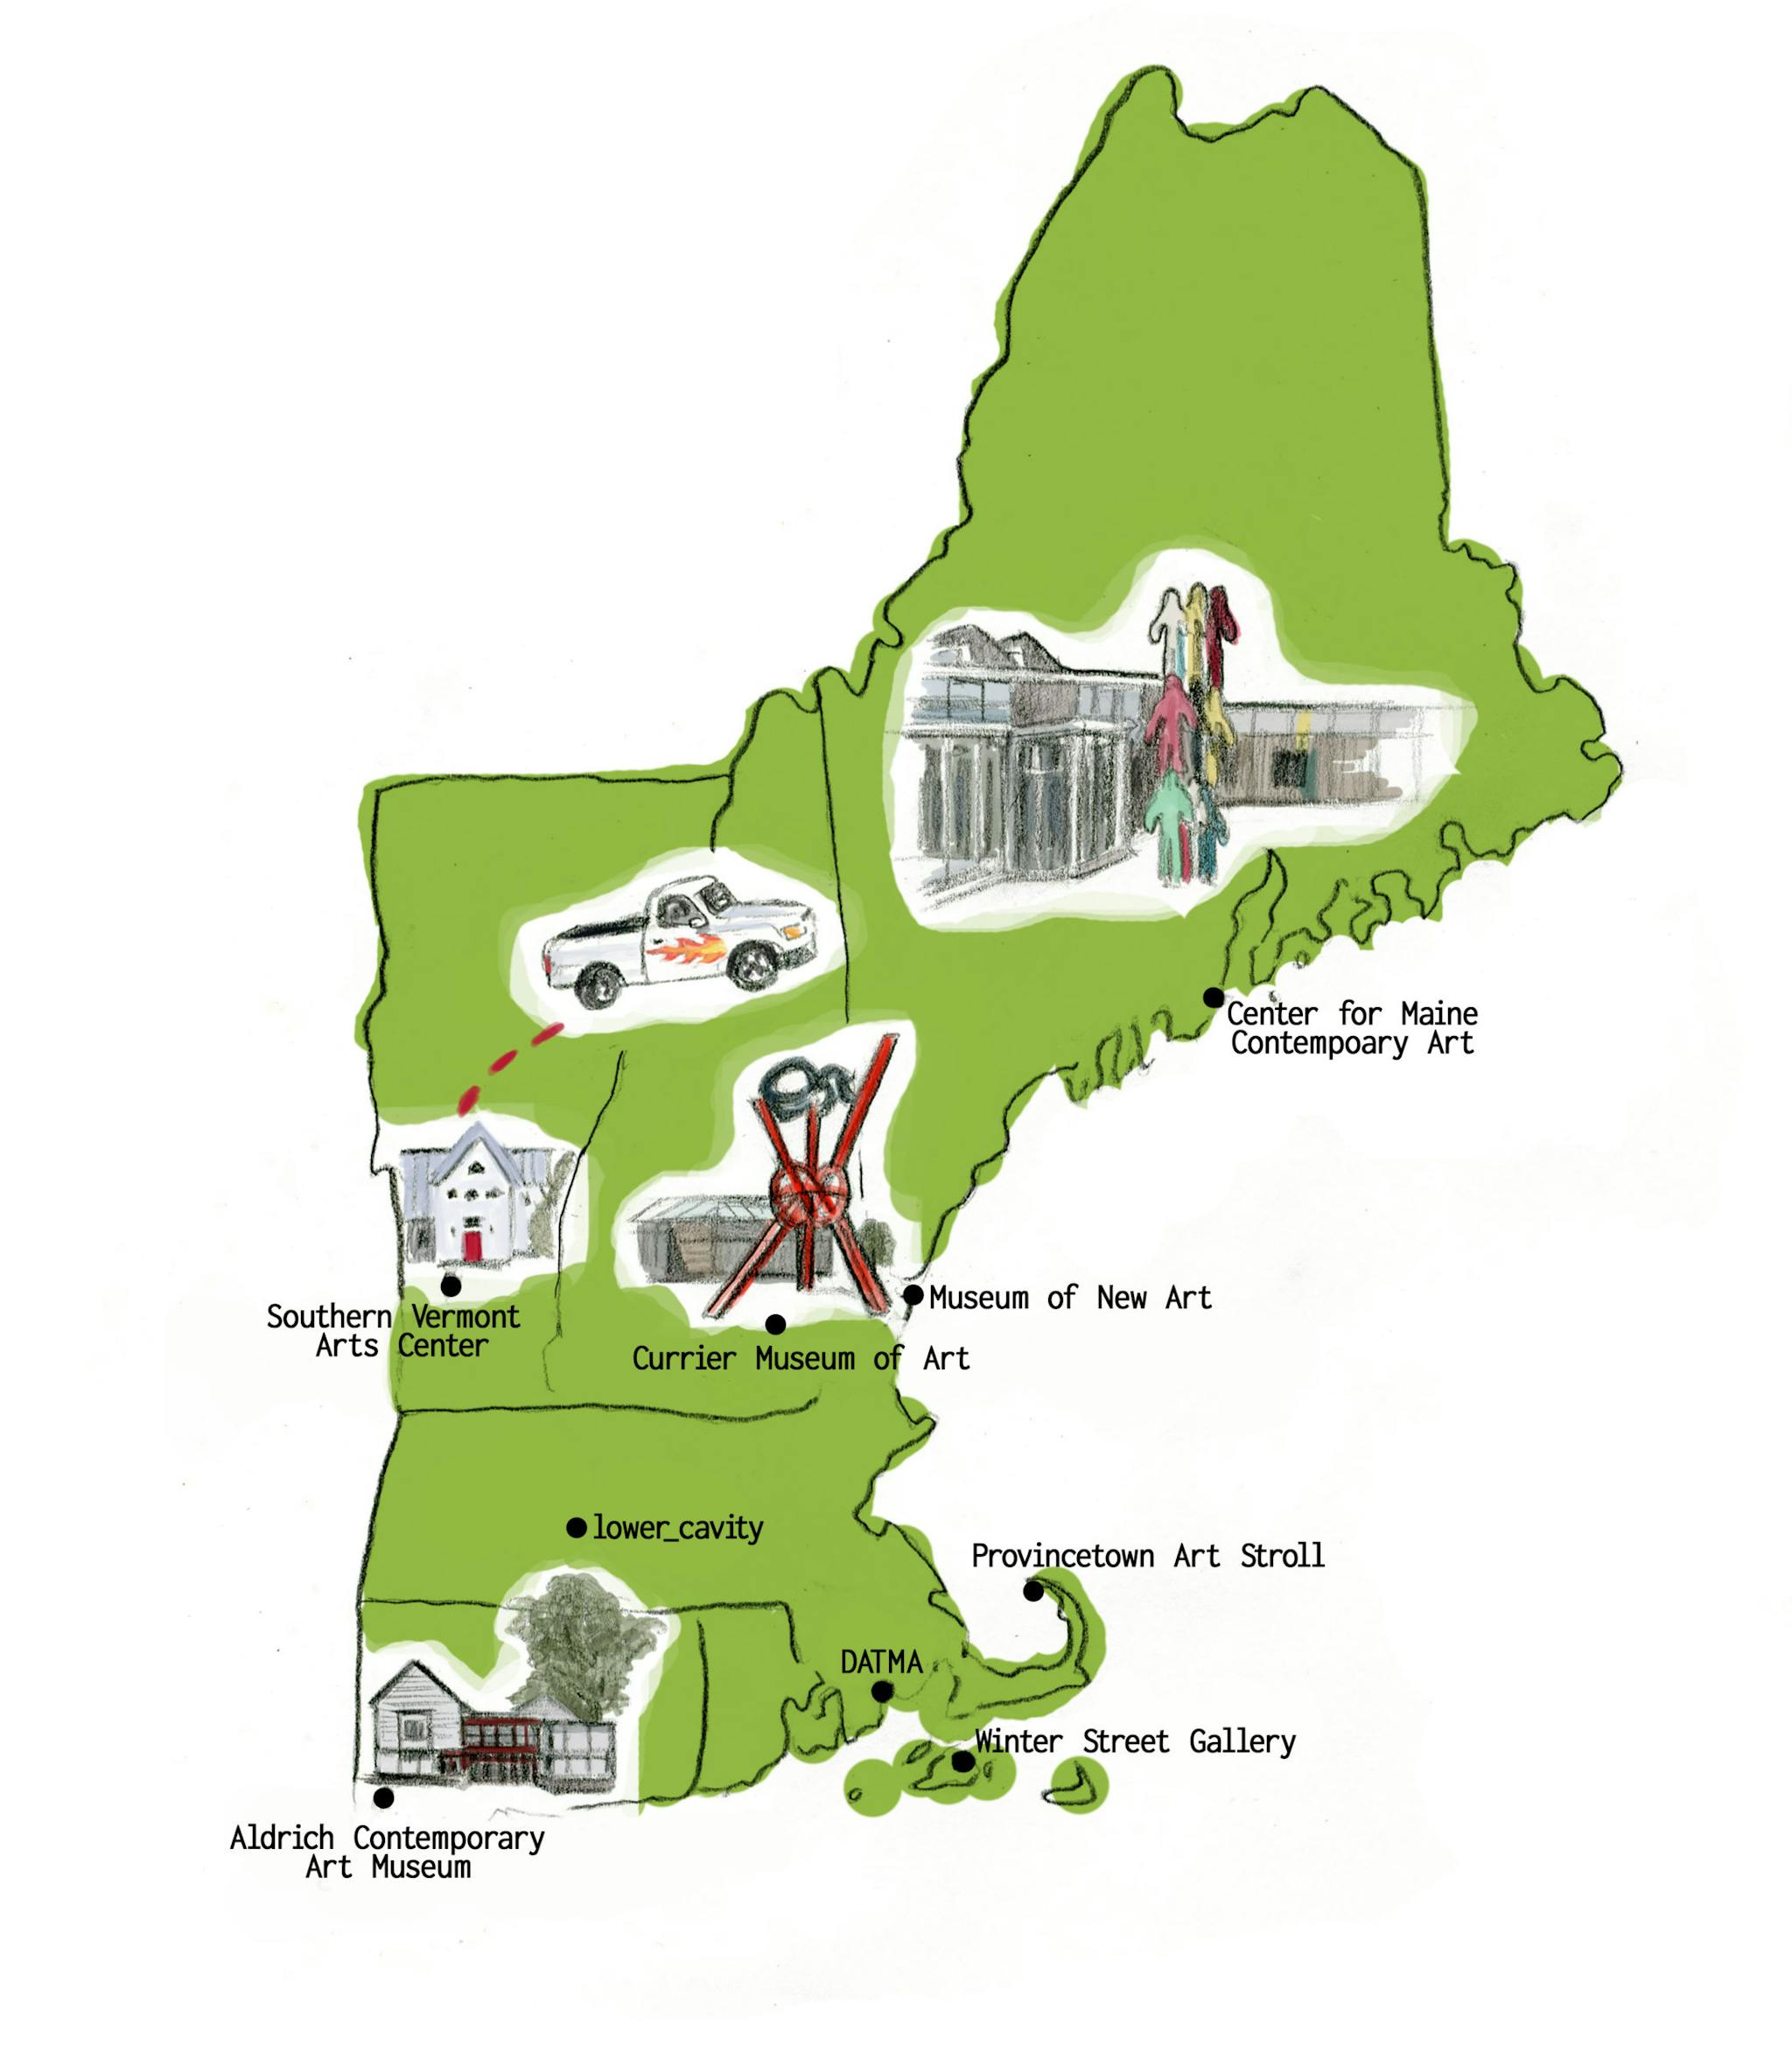 Illustration of New England with a green background and small illustrations of art destinations.